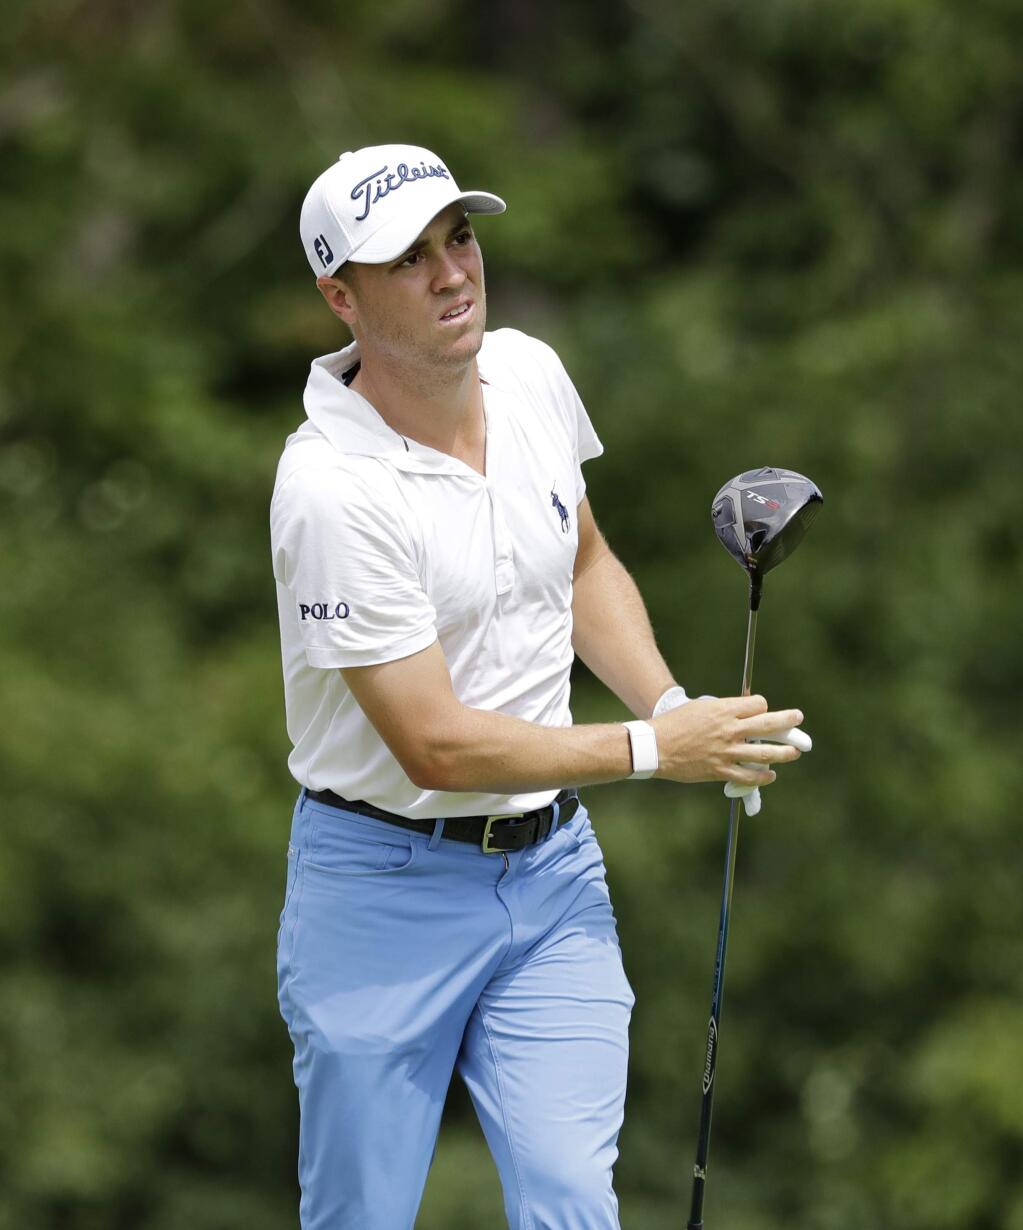 Justin Thomas watches his tee shot on the fifth hole during the final round of the BMW Championship golf tournament at Medinah Country Club, Sunday, Aug. 18, 2019, in Medinah, Ill. (AP Photo/Nam Y. Huh)